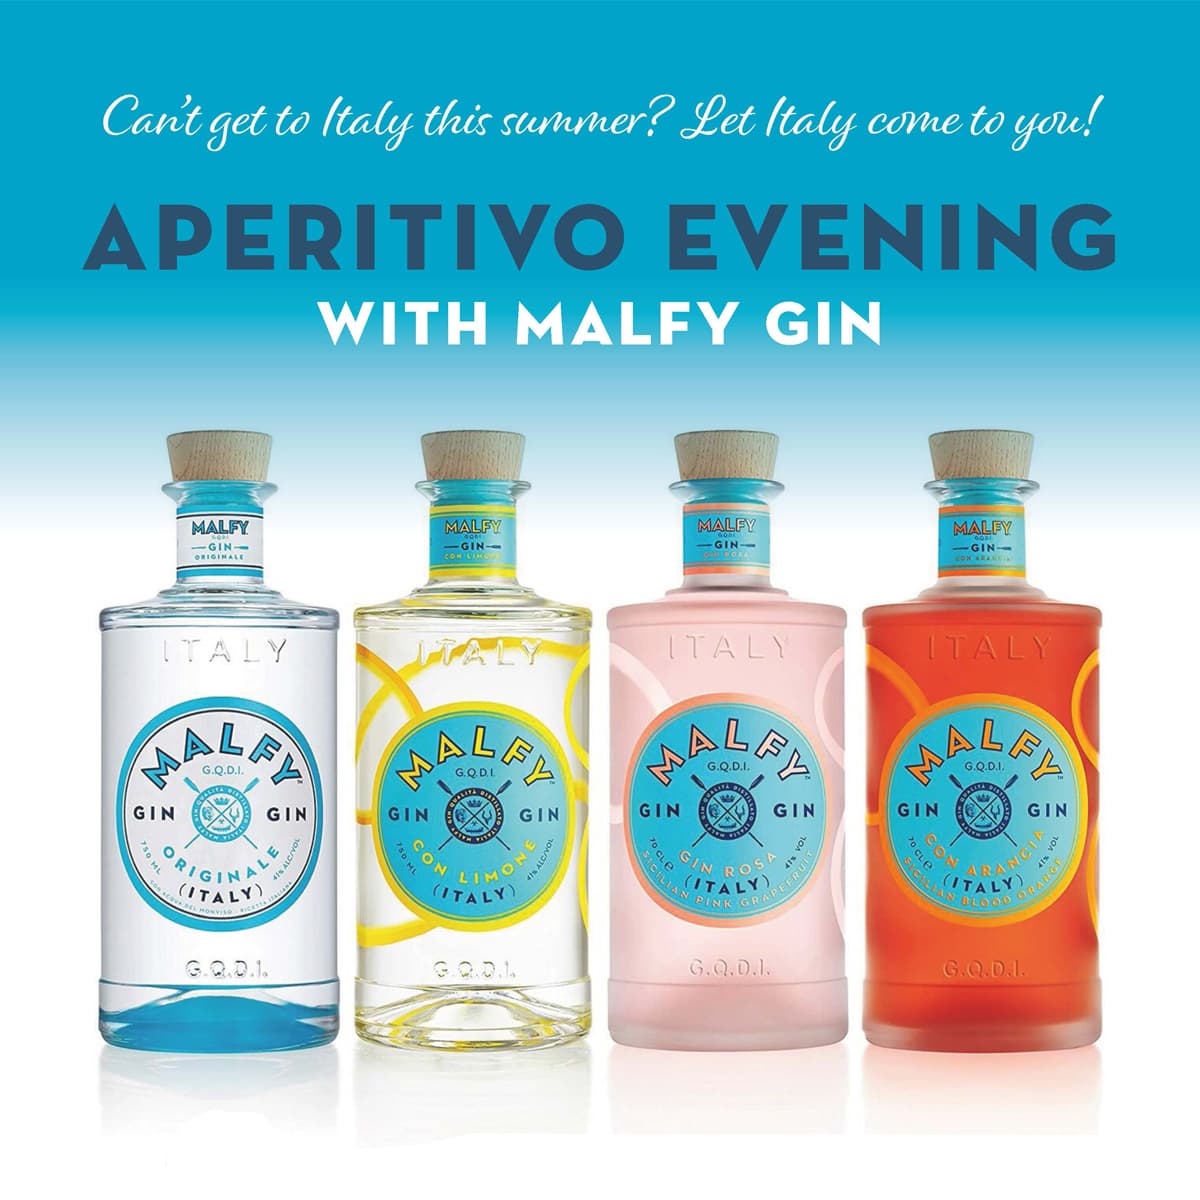 Aperitivo Evening with Malfy Gin at Badger and Co in Edinburgh